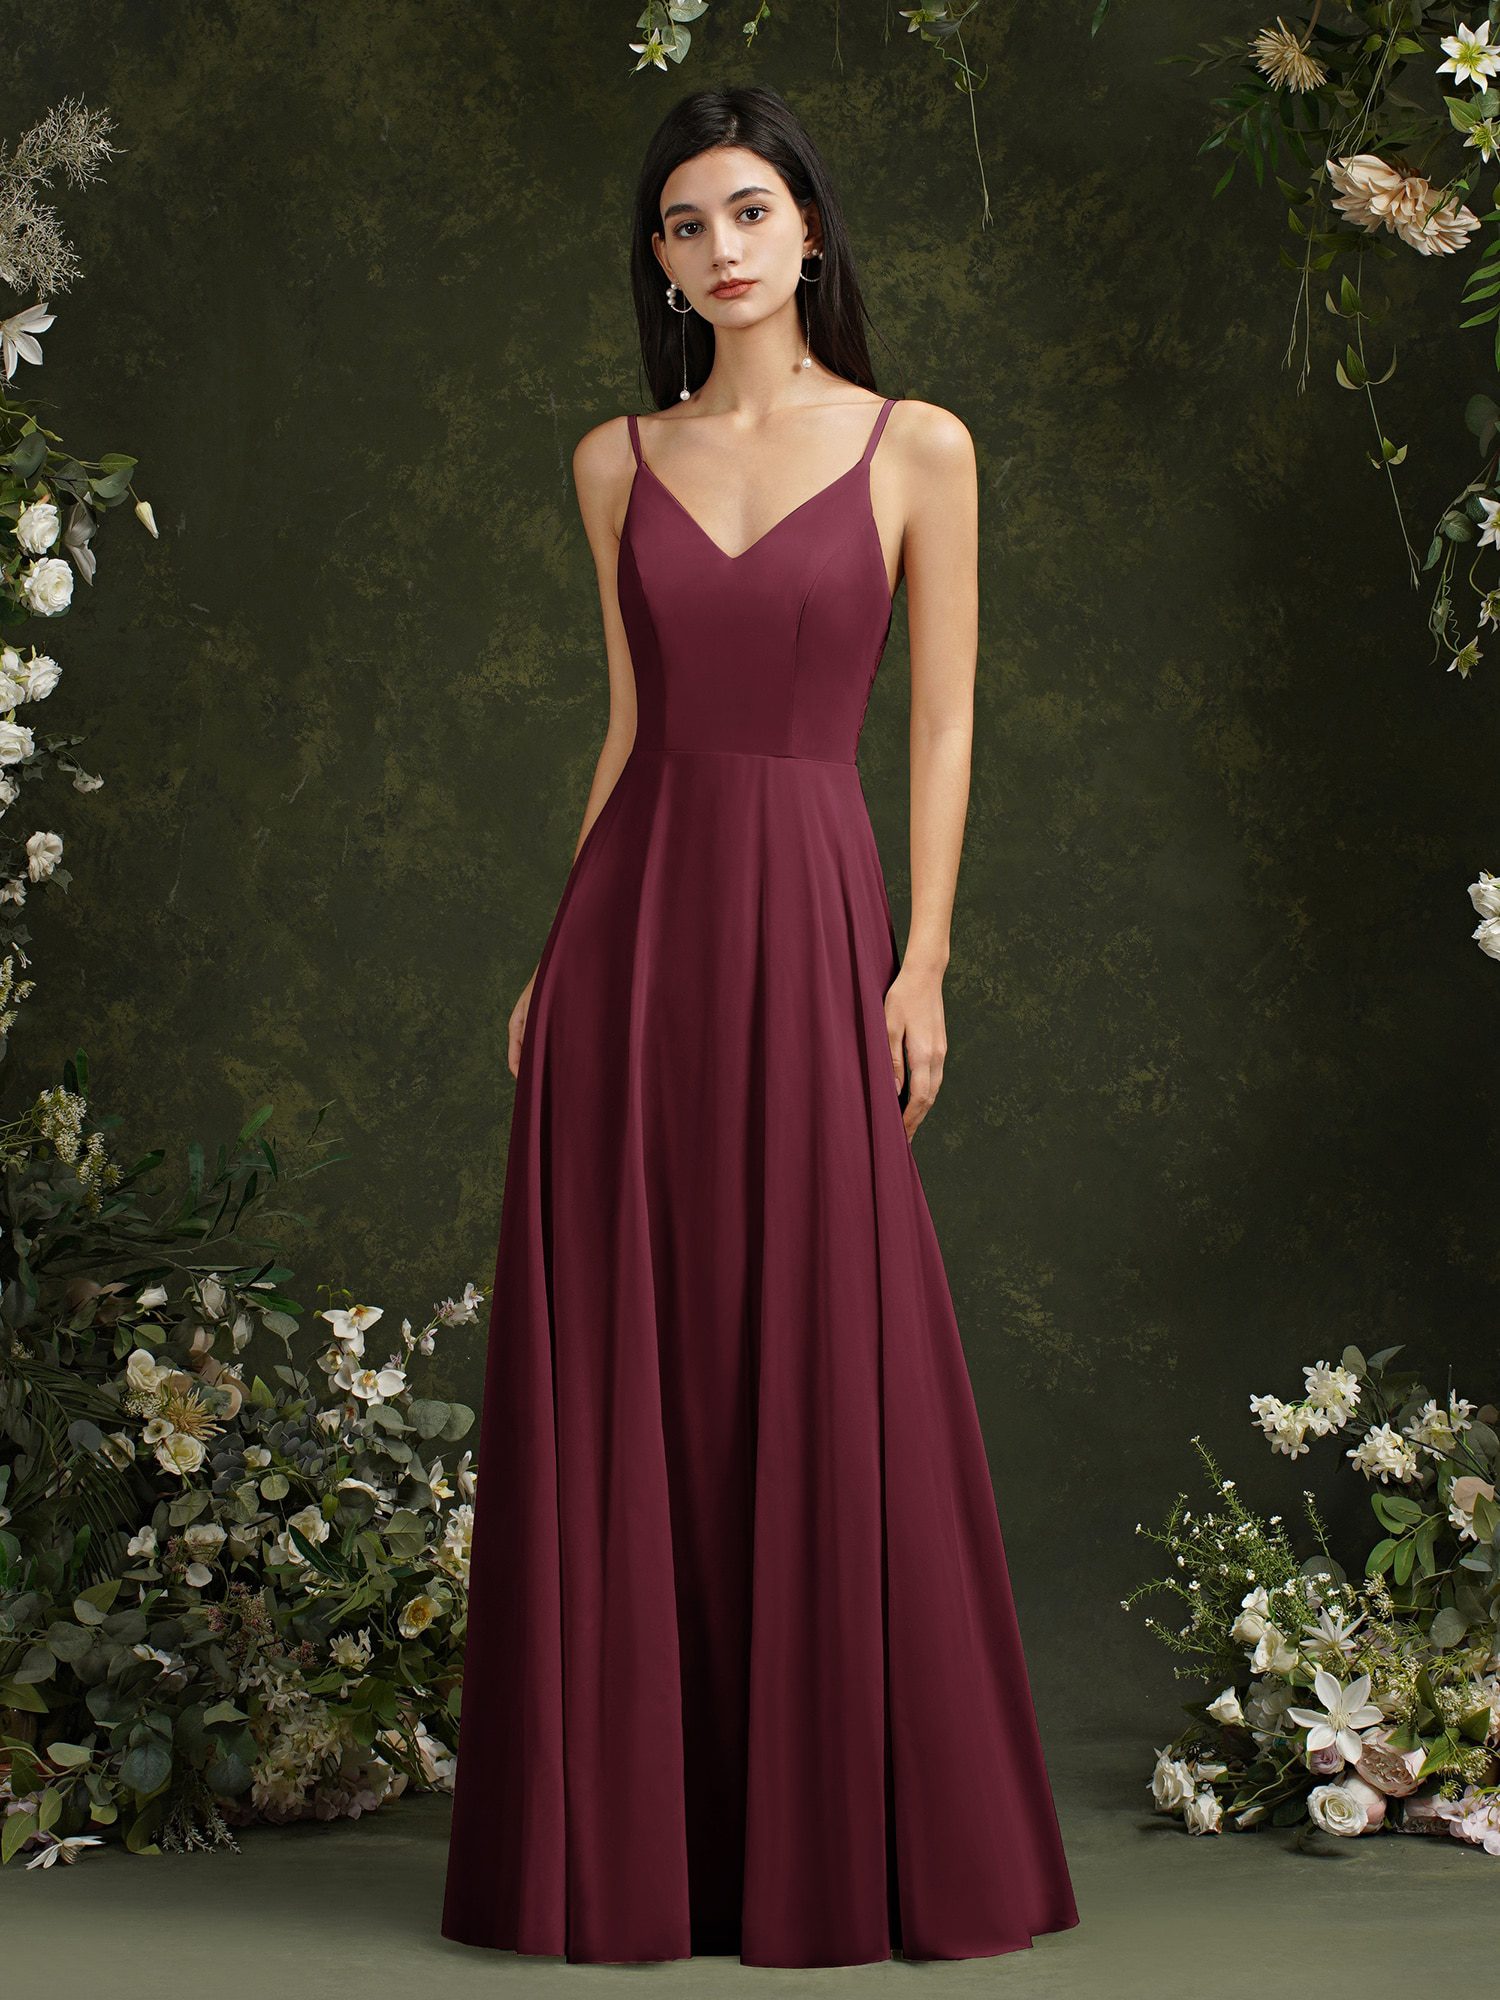 Burgundy Lace Chiffon Bridesmaid Dresses For Women 2022 A-line V-Neck Beach Dress Spaghetti Strap Formal Wedding Prom Party Gown